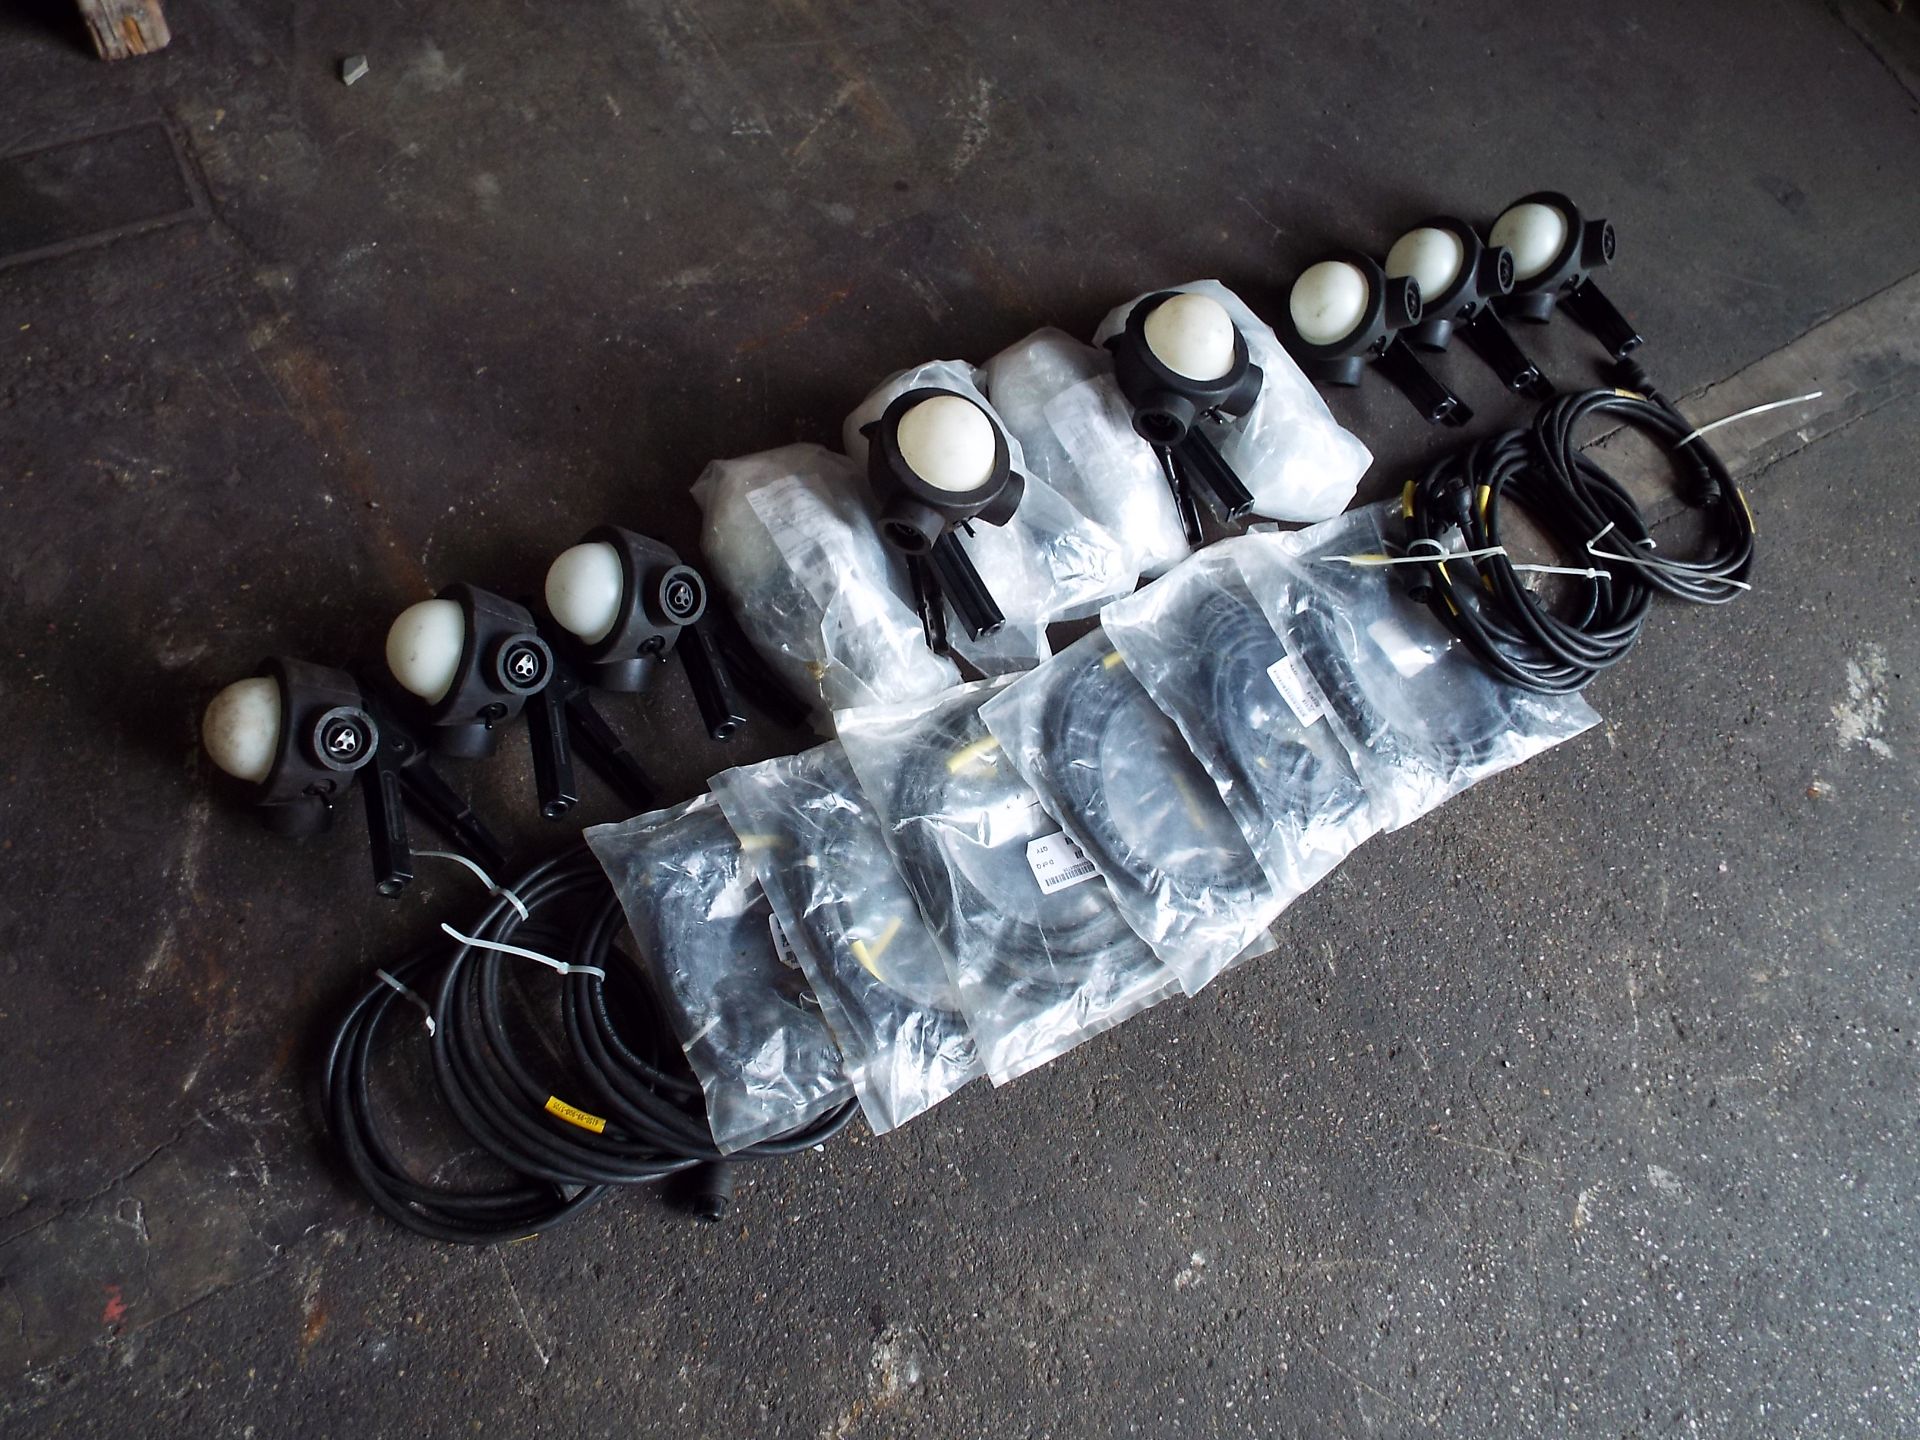 12 x Smith and Prince Gripper Work Lights with Cables